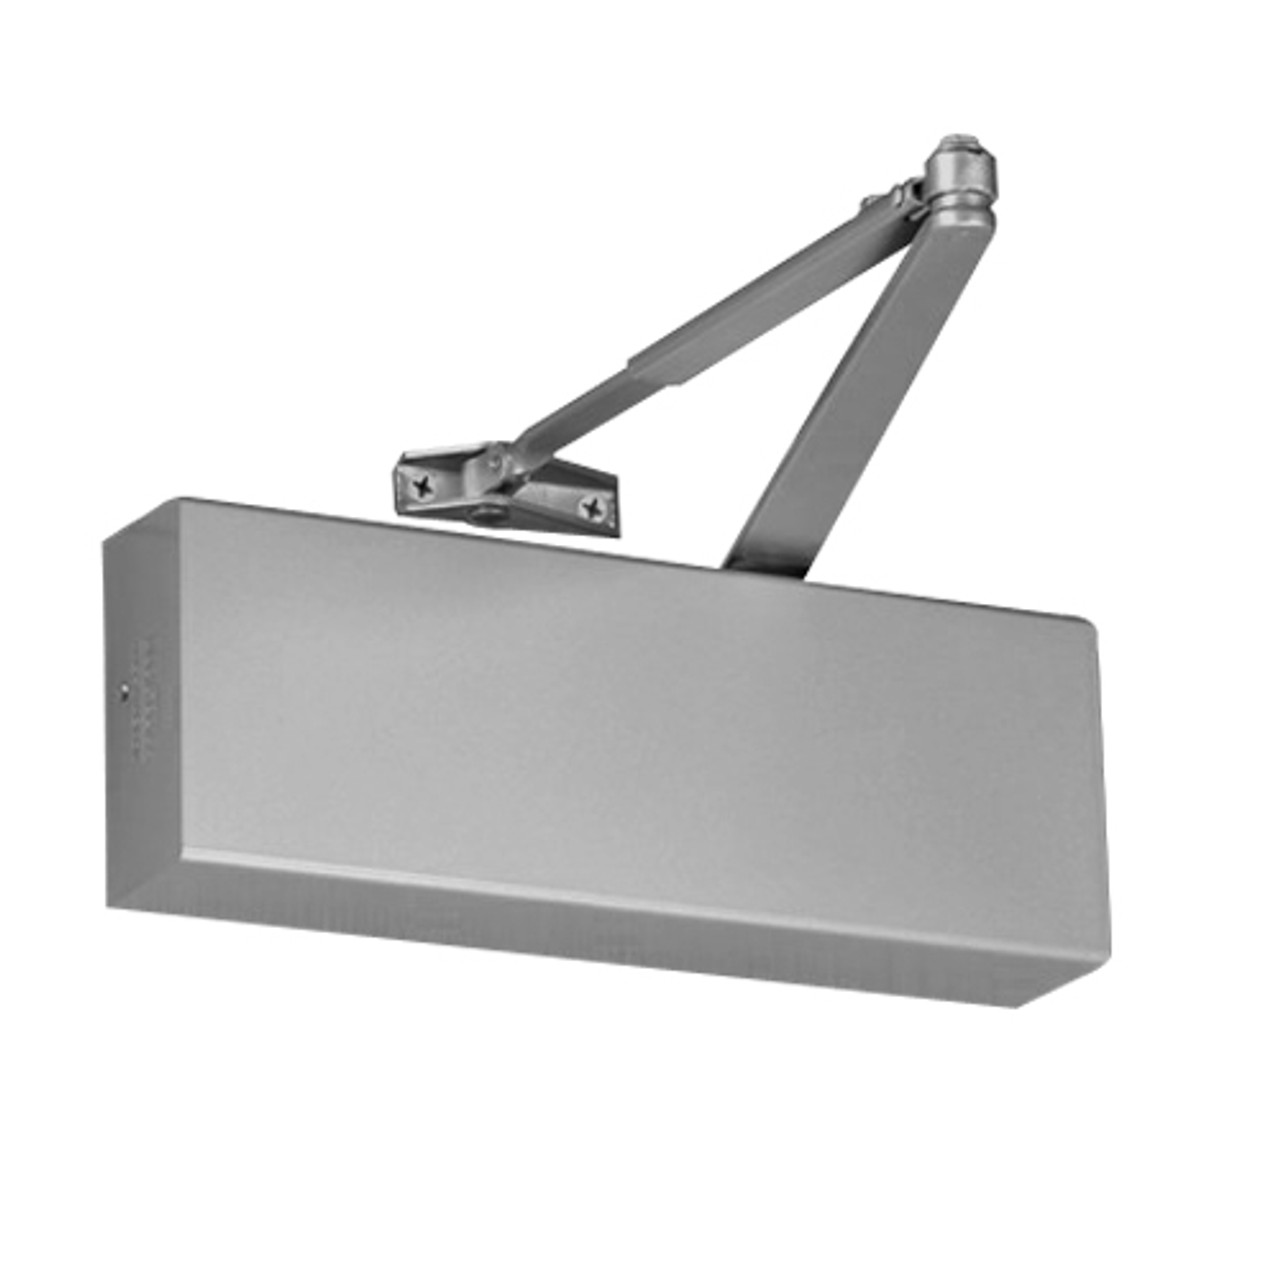 9500HDA-689 Norton 9500 Series Hold Open Cast Iron Door Closer with Regular Arm Parallel or Top Jamb to 3 inch Reveal in Aluminum Finish